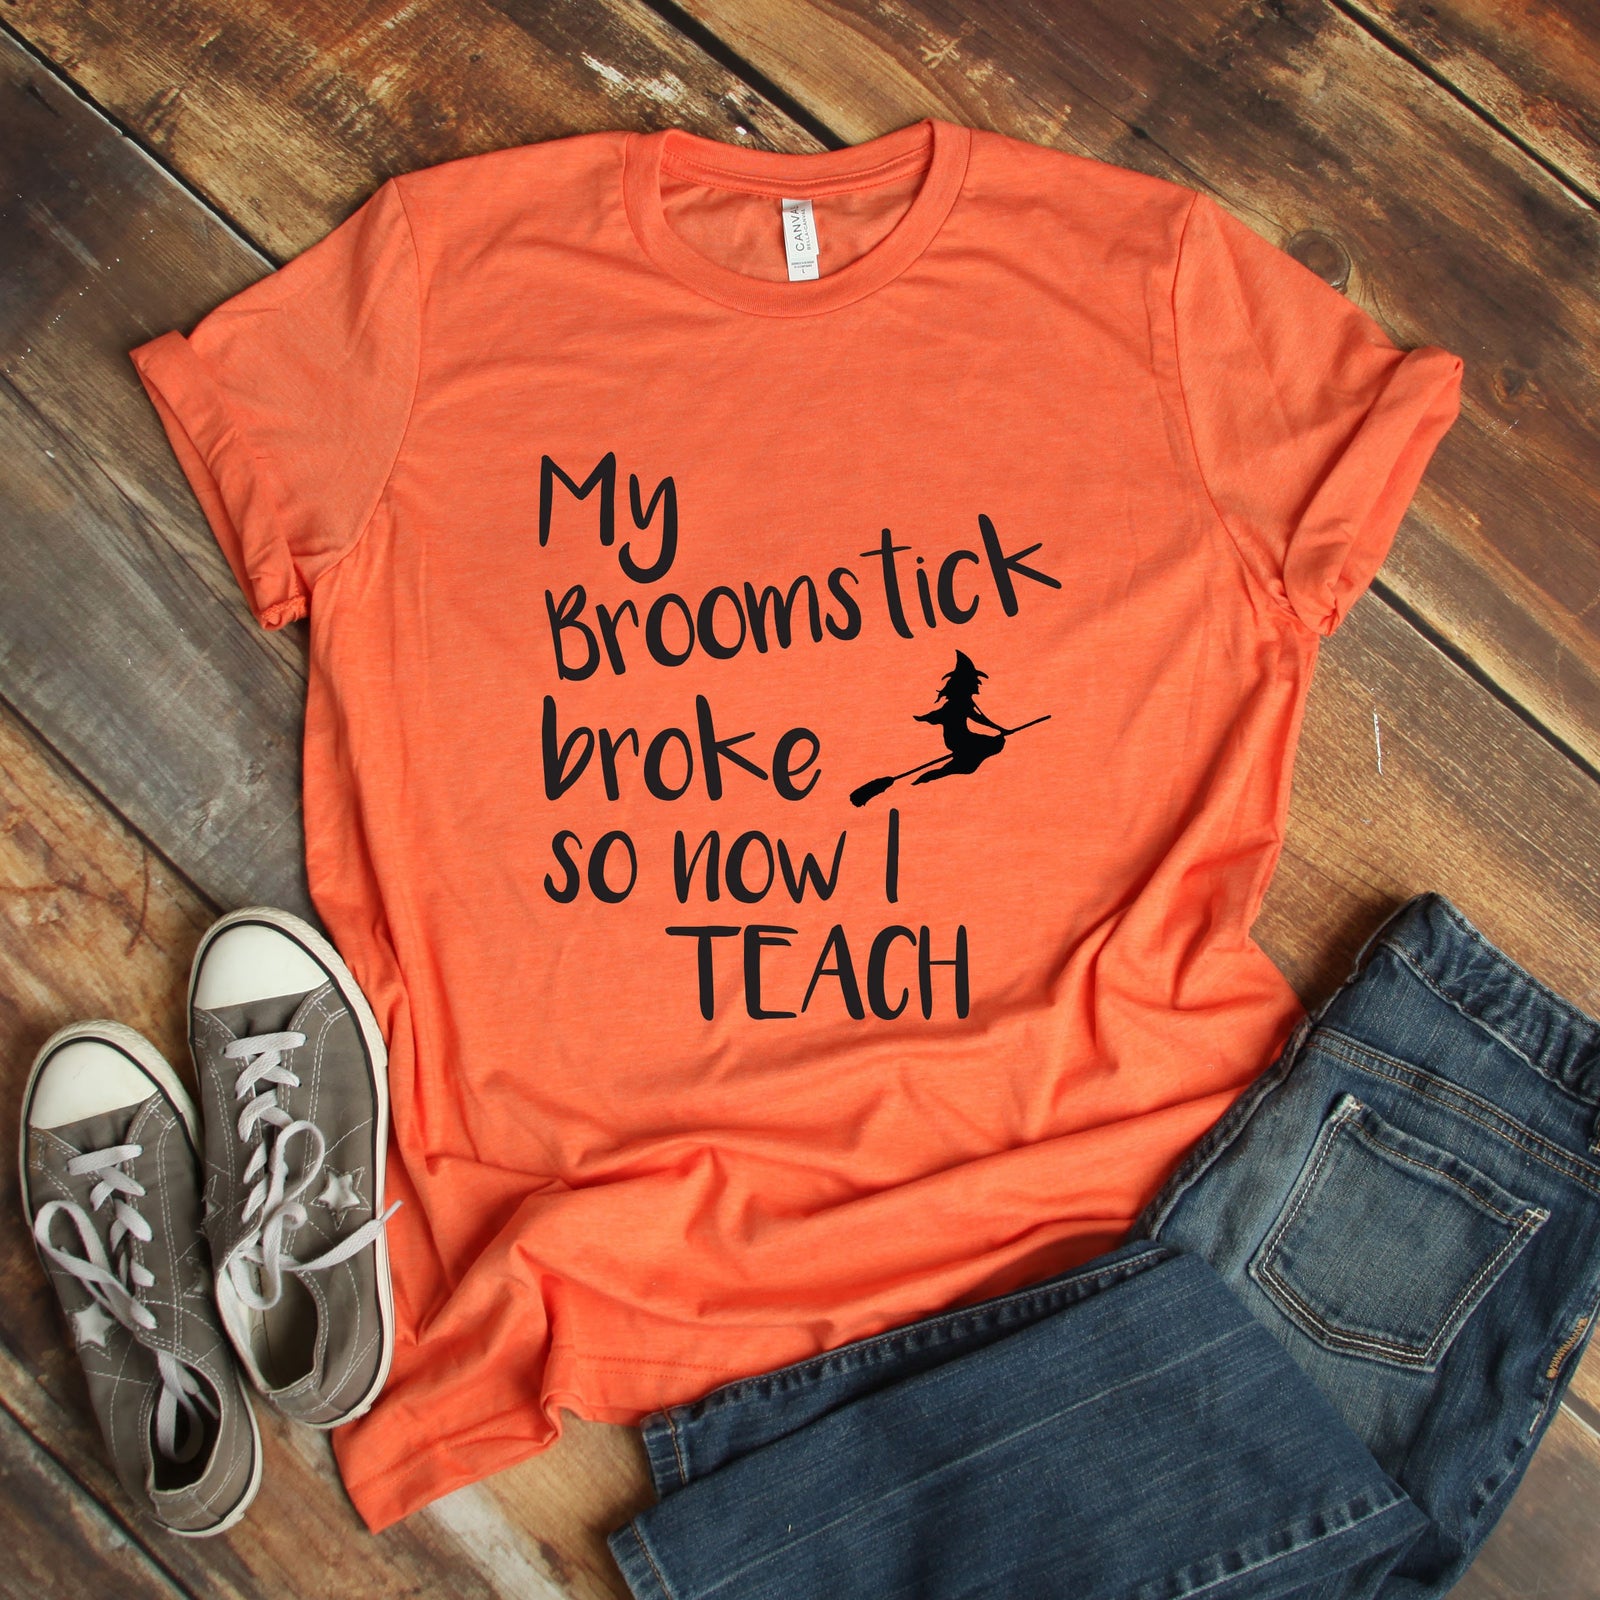 My Broomstick Broke So Now I Teach - Happy Halloween Adult T Shirt - Funny T Shirts